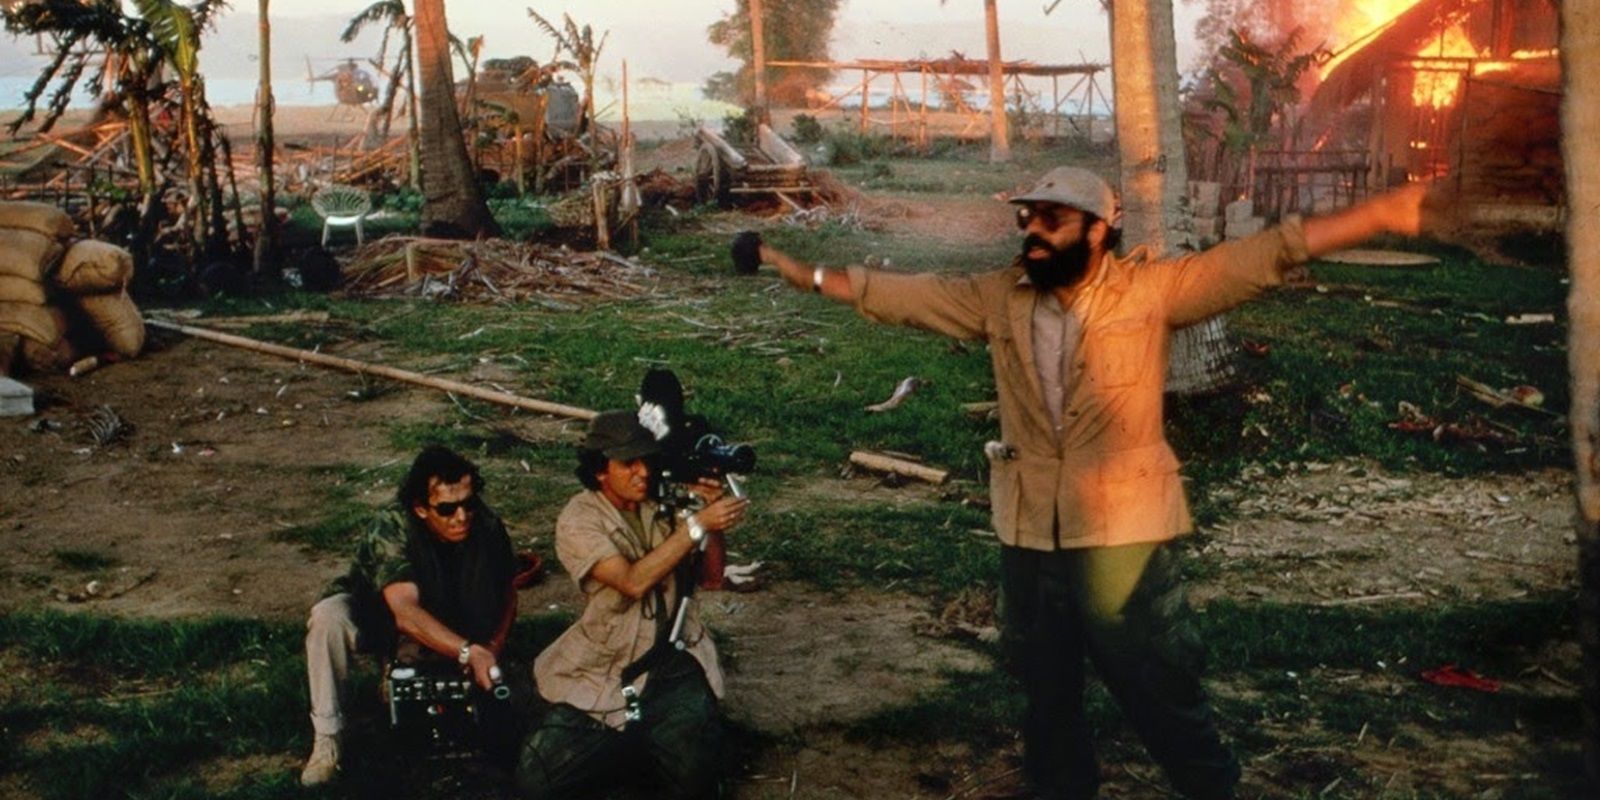 Francis Ford Coppola waves his arms on the set of Apocalypse Now in Hearts of Darkness